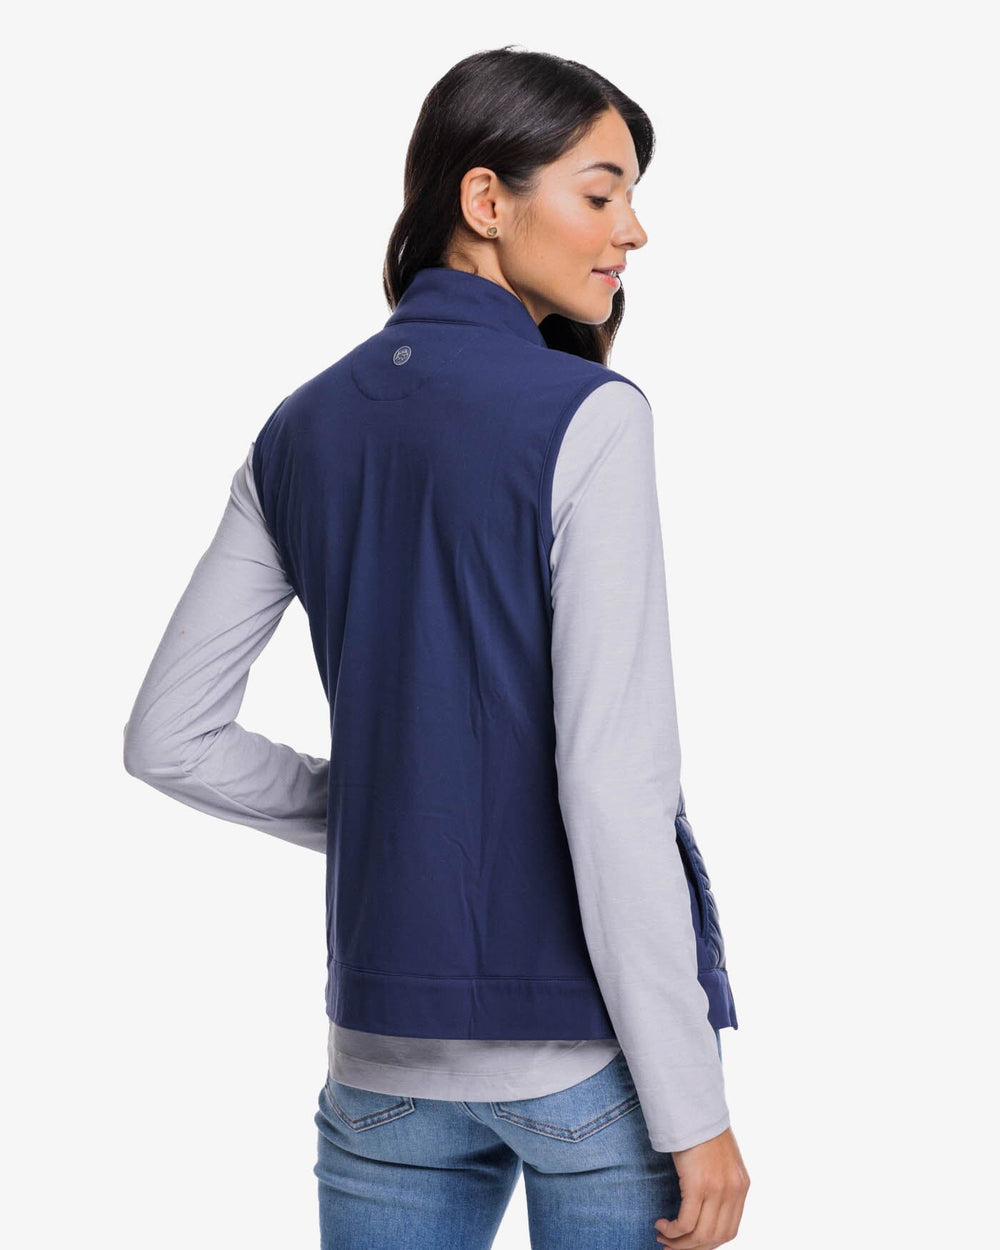 The back view of the Southern Tide Shawna Mixed Media Vest by Southern Tide - Nautical Navy